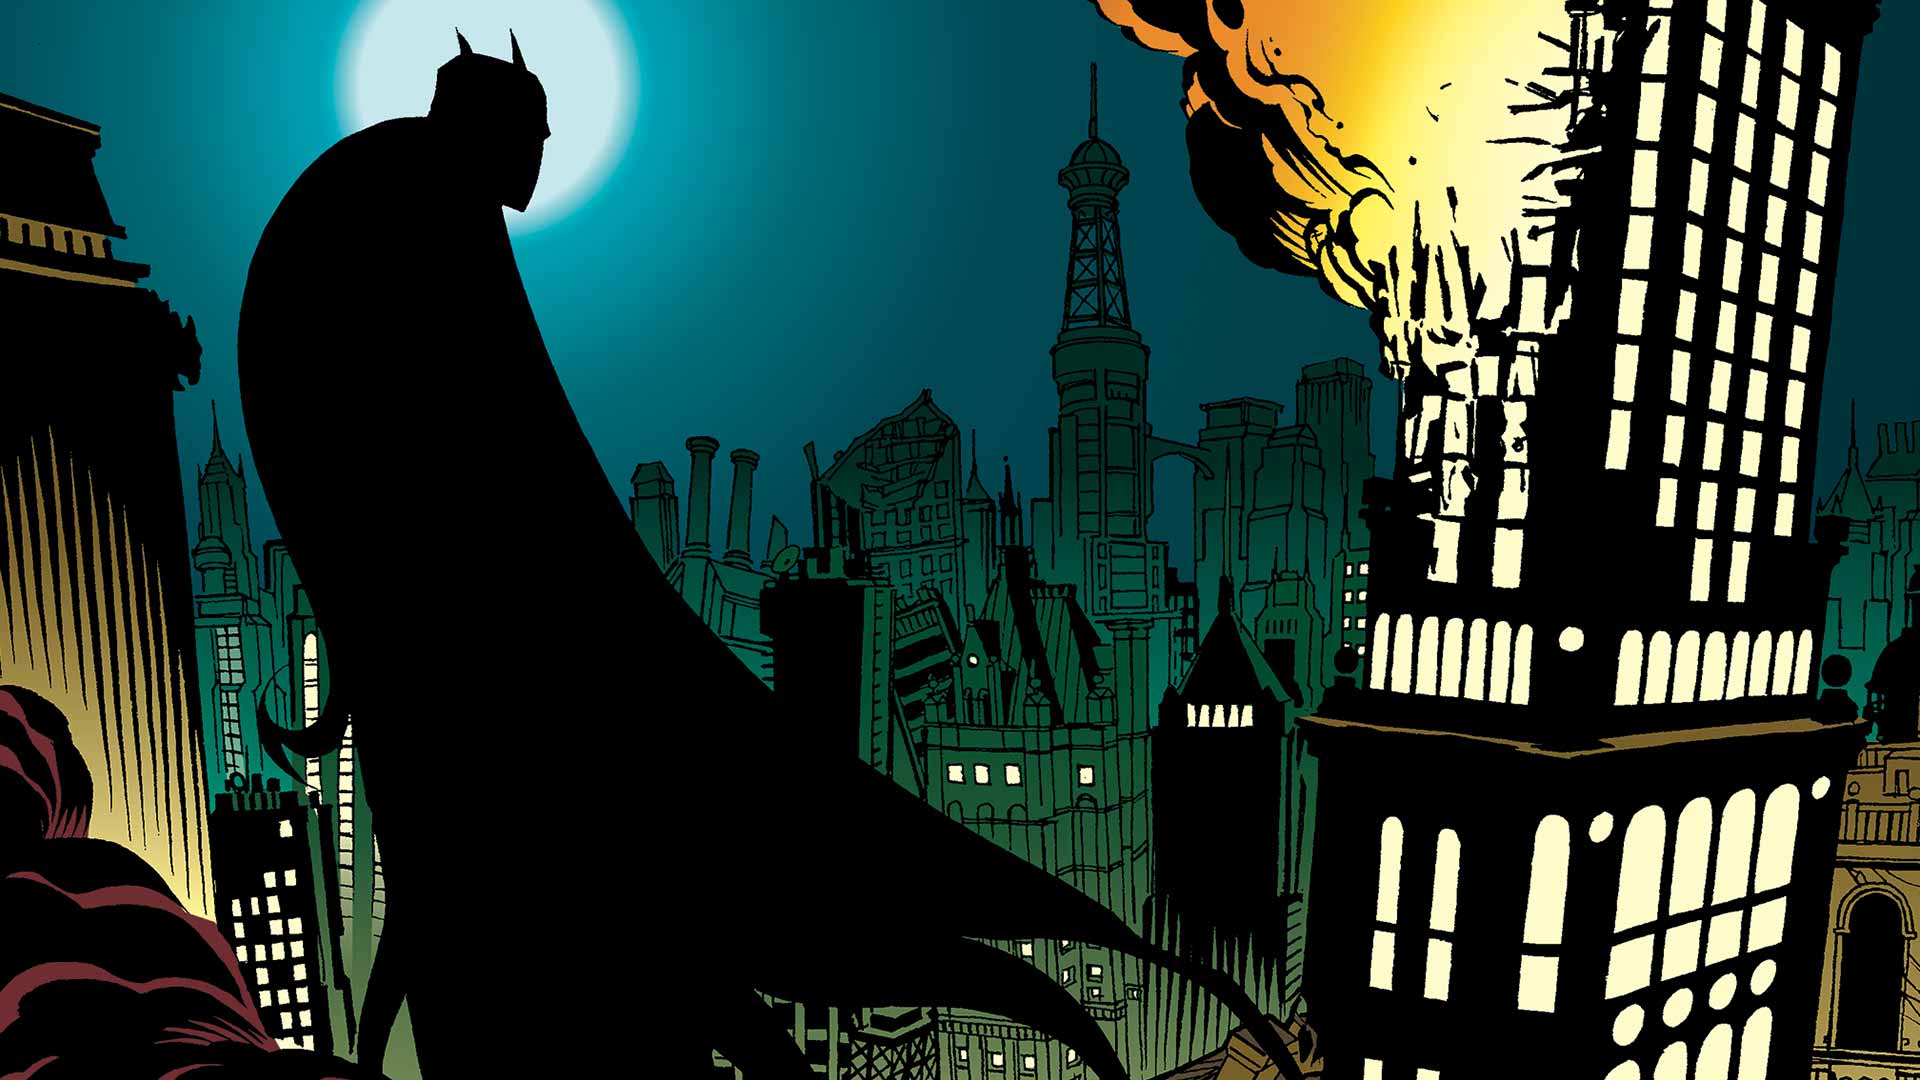 Batman Cataclysm Review By Deffinition as part of my Batman Chronological Graphic Novel Read Through